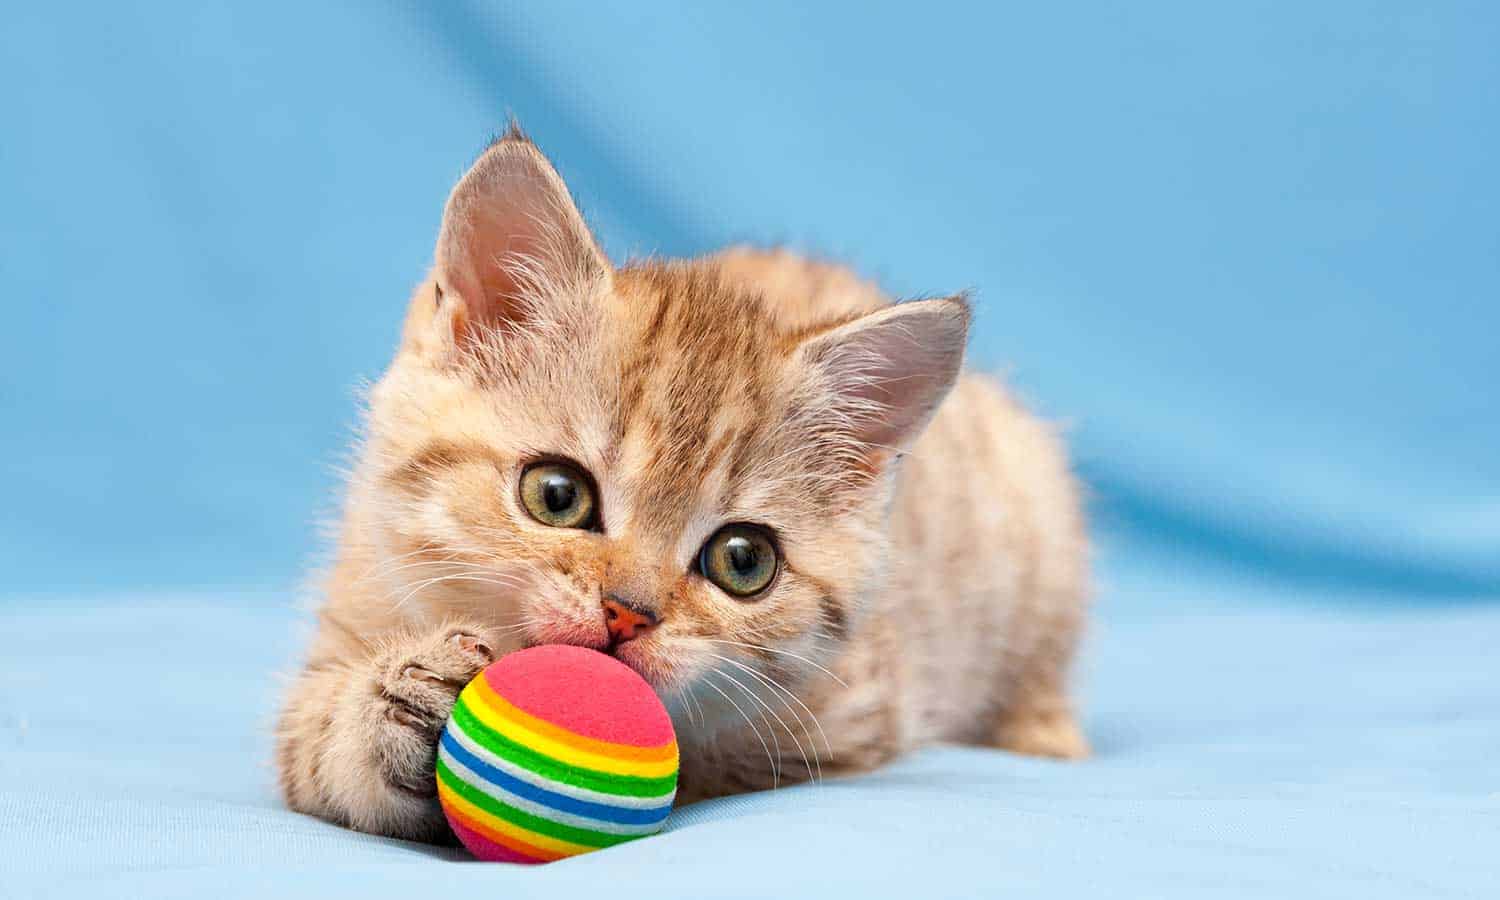 A kitten playing with a multi-colored ball